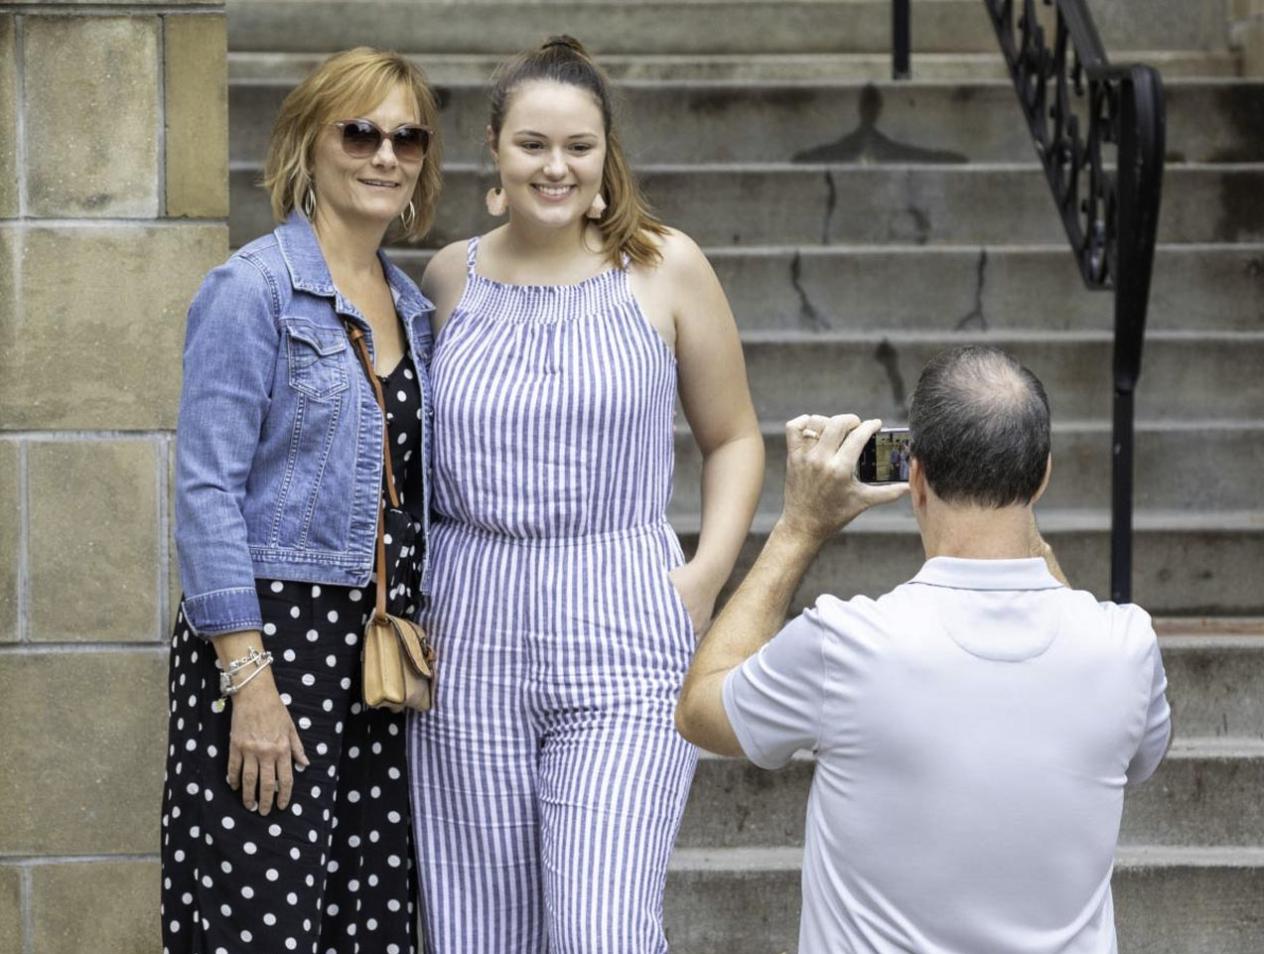 Parents taking photos with daughter on campus.